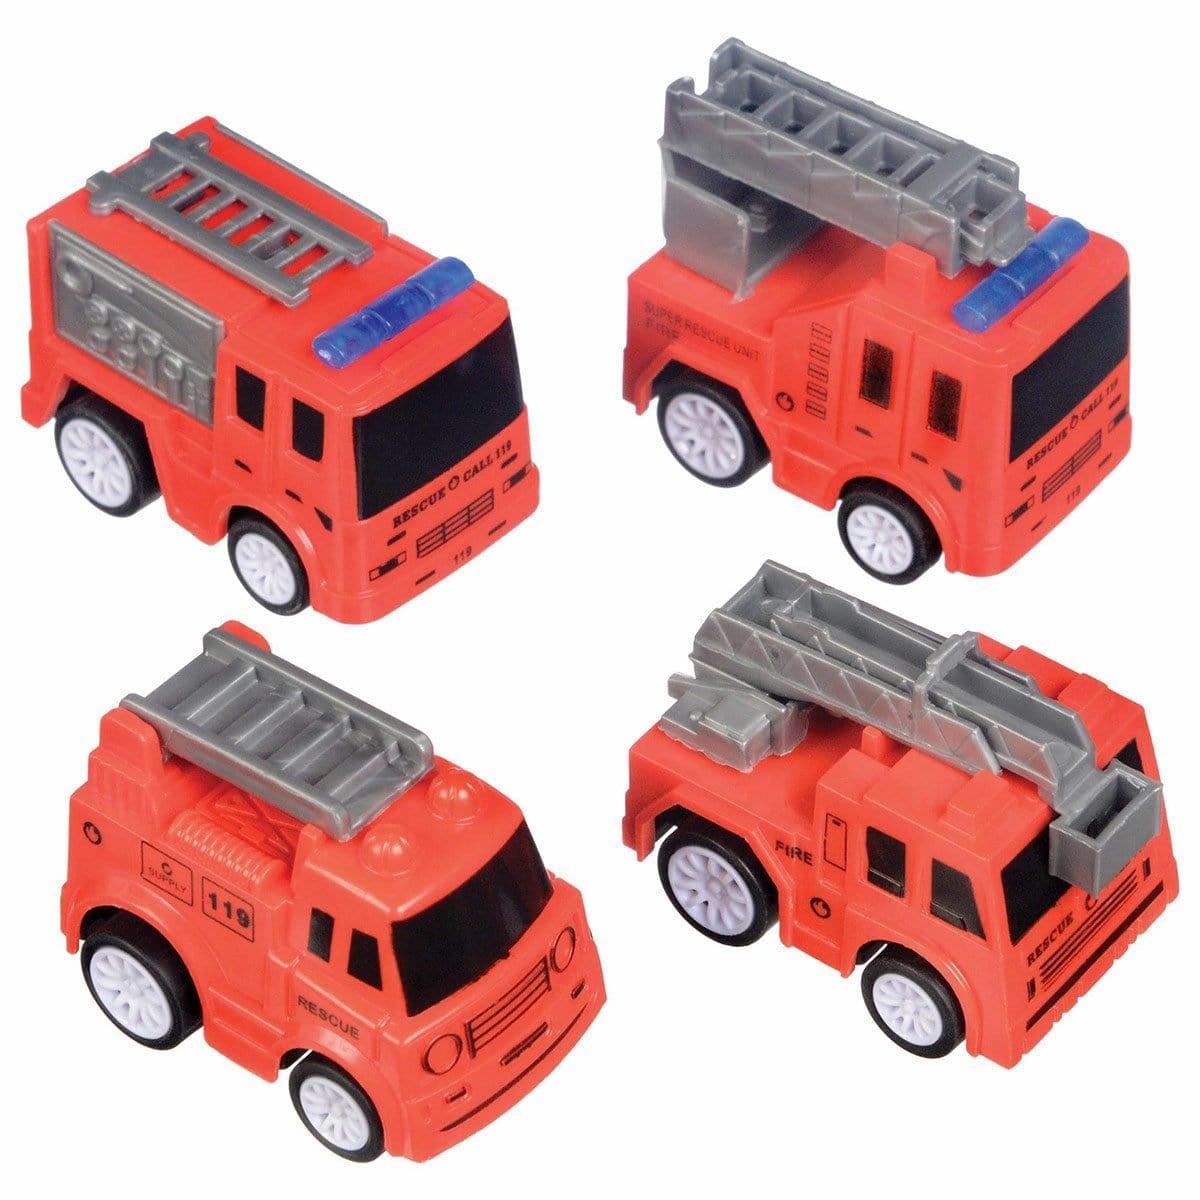 Buy Kids Birthday First Responders Fire Truck Favor, 4 Count sold at Party Expert